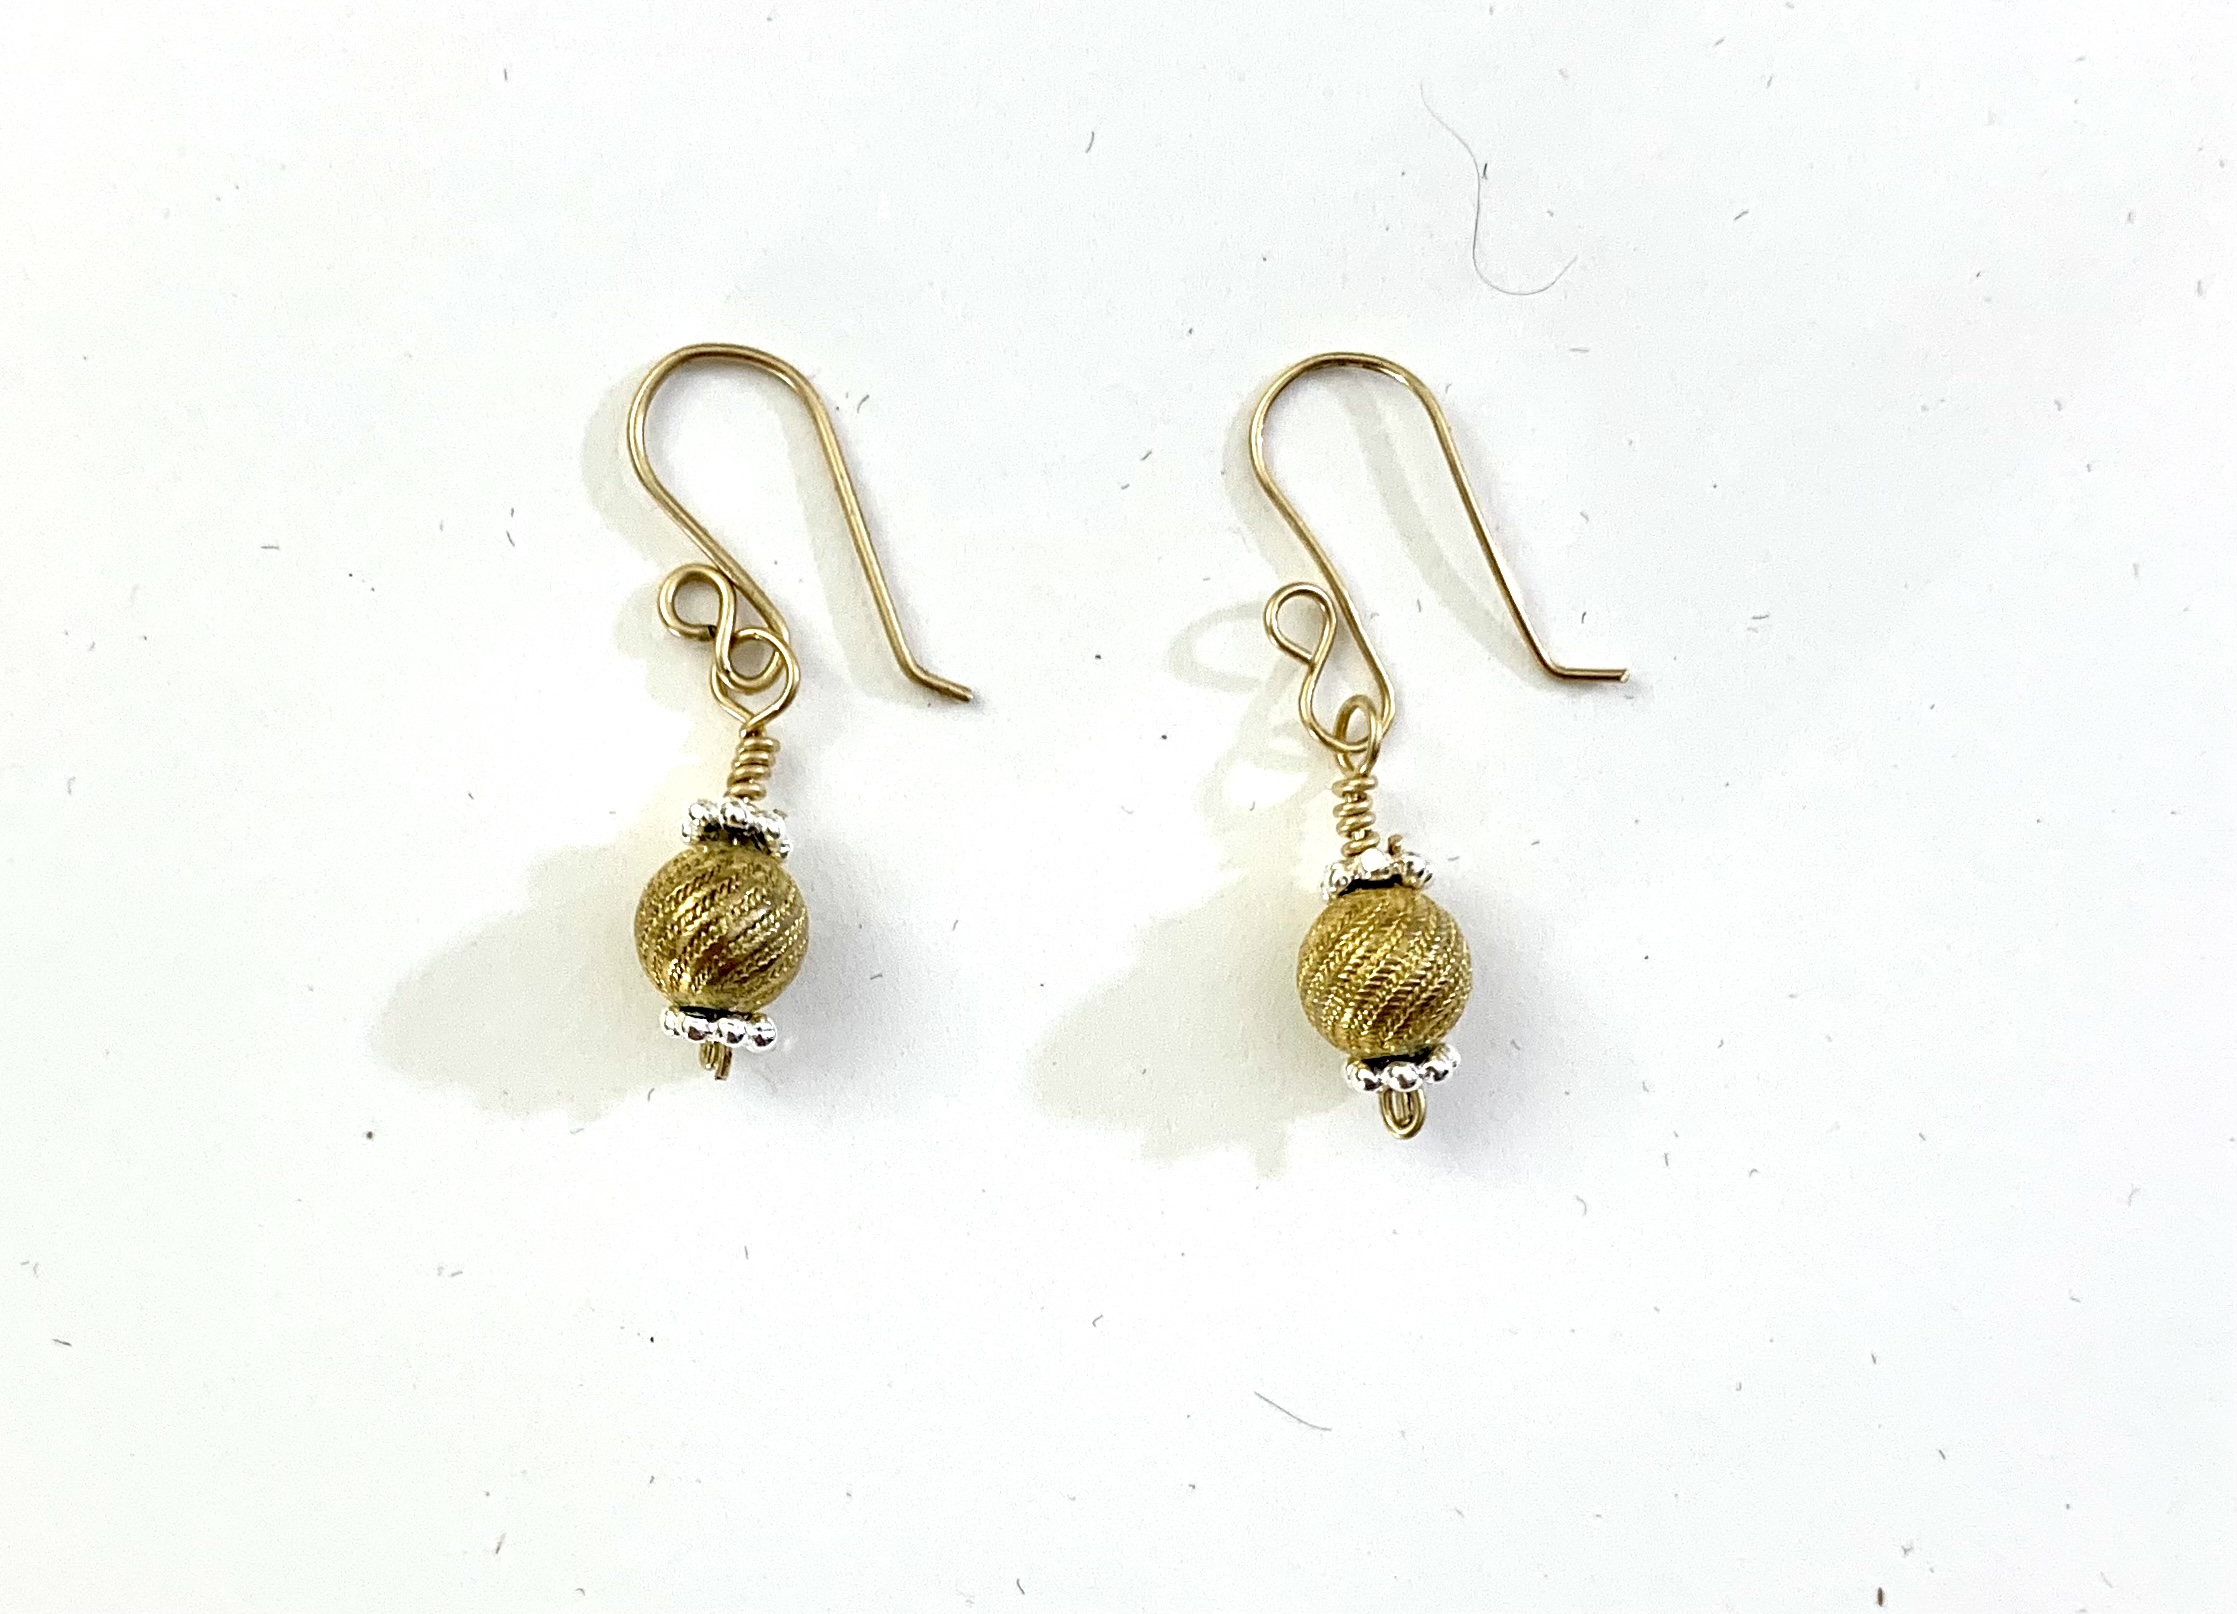 Gold Filled and Sterling Silver earrings